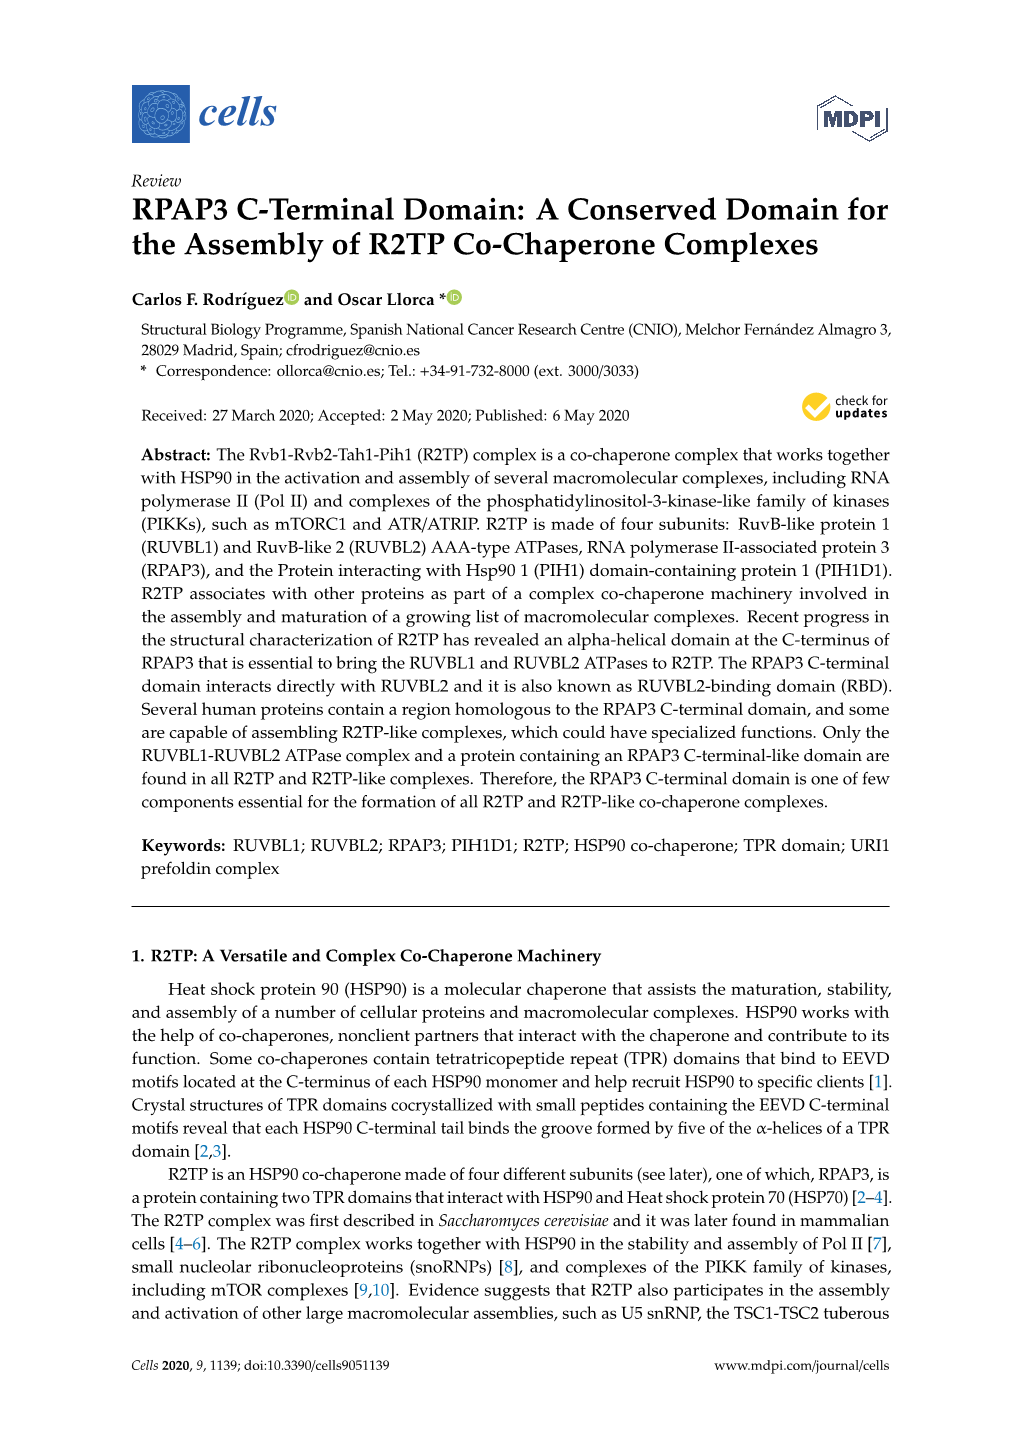 RPAP3 C-Terminal Domain: a Conserved Domain for the Assembly of R2TP Co-Chaperone Complexes